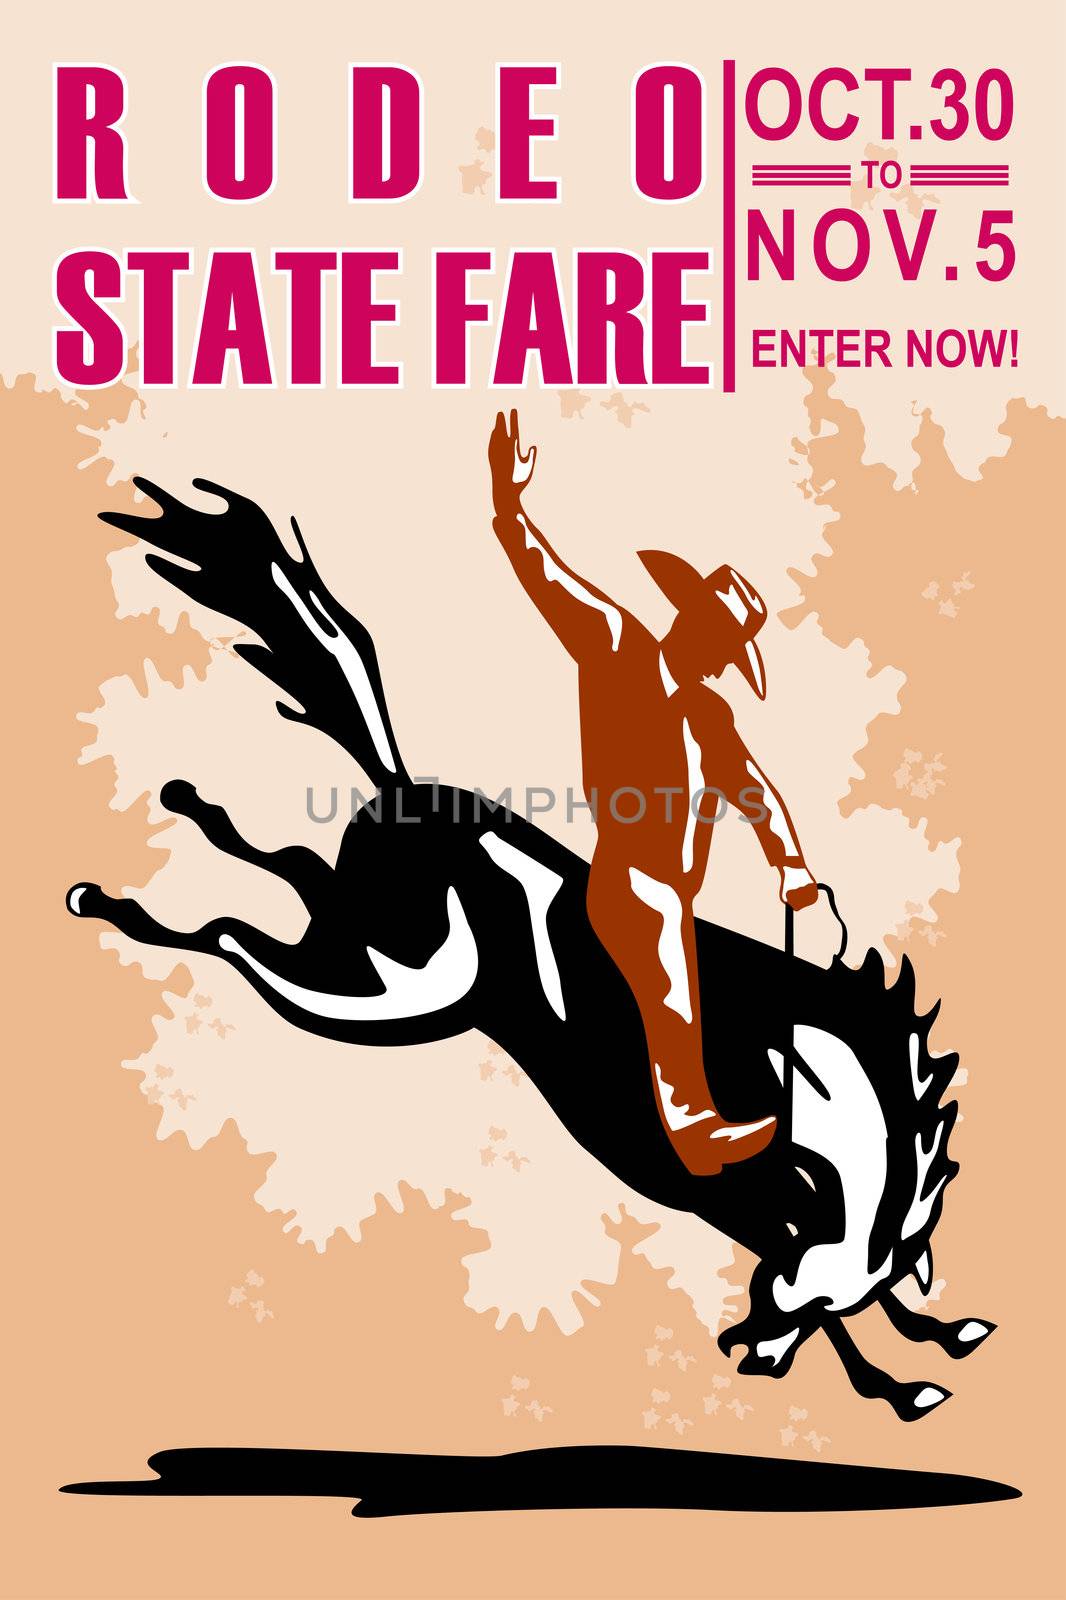 retro style illustration of a Poster showing an American  Rodeo Cowboy riding  a bucking bronco horse jumping viewed from side with words "Rodeo State Fair Oct. 30 to Nov. 5 join now"